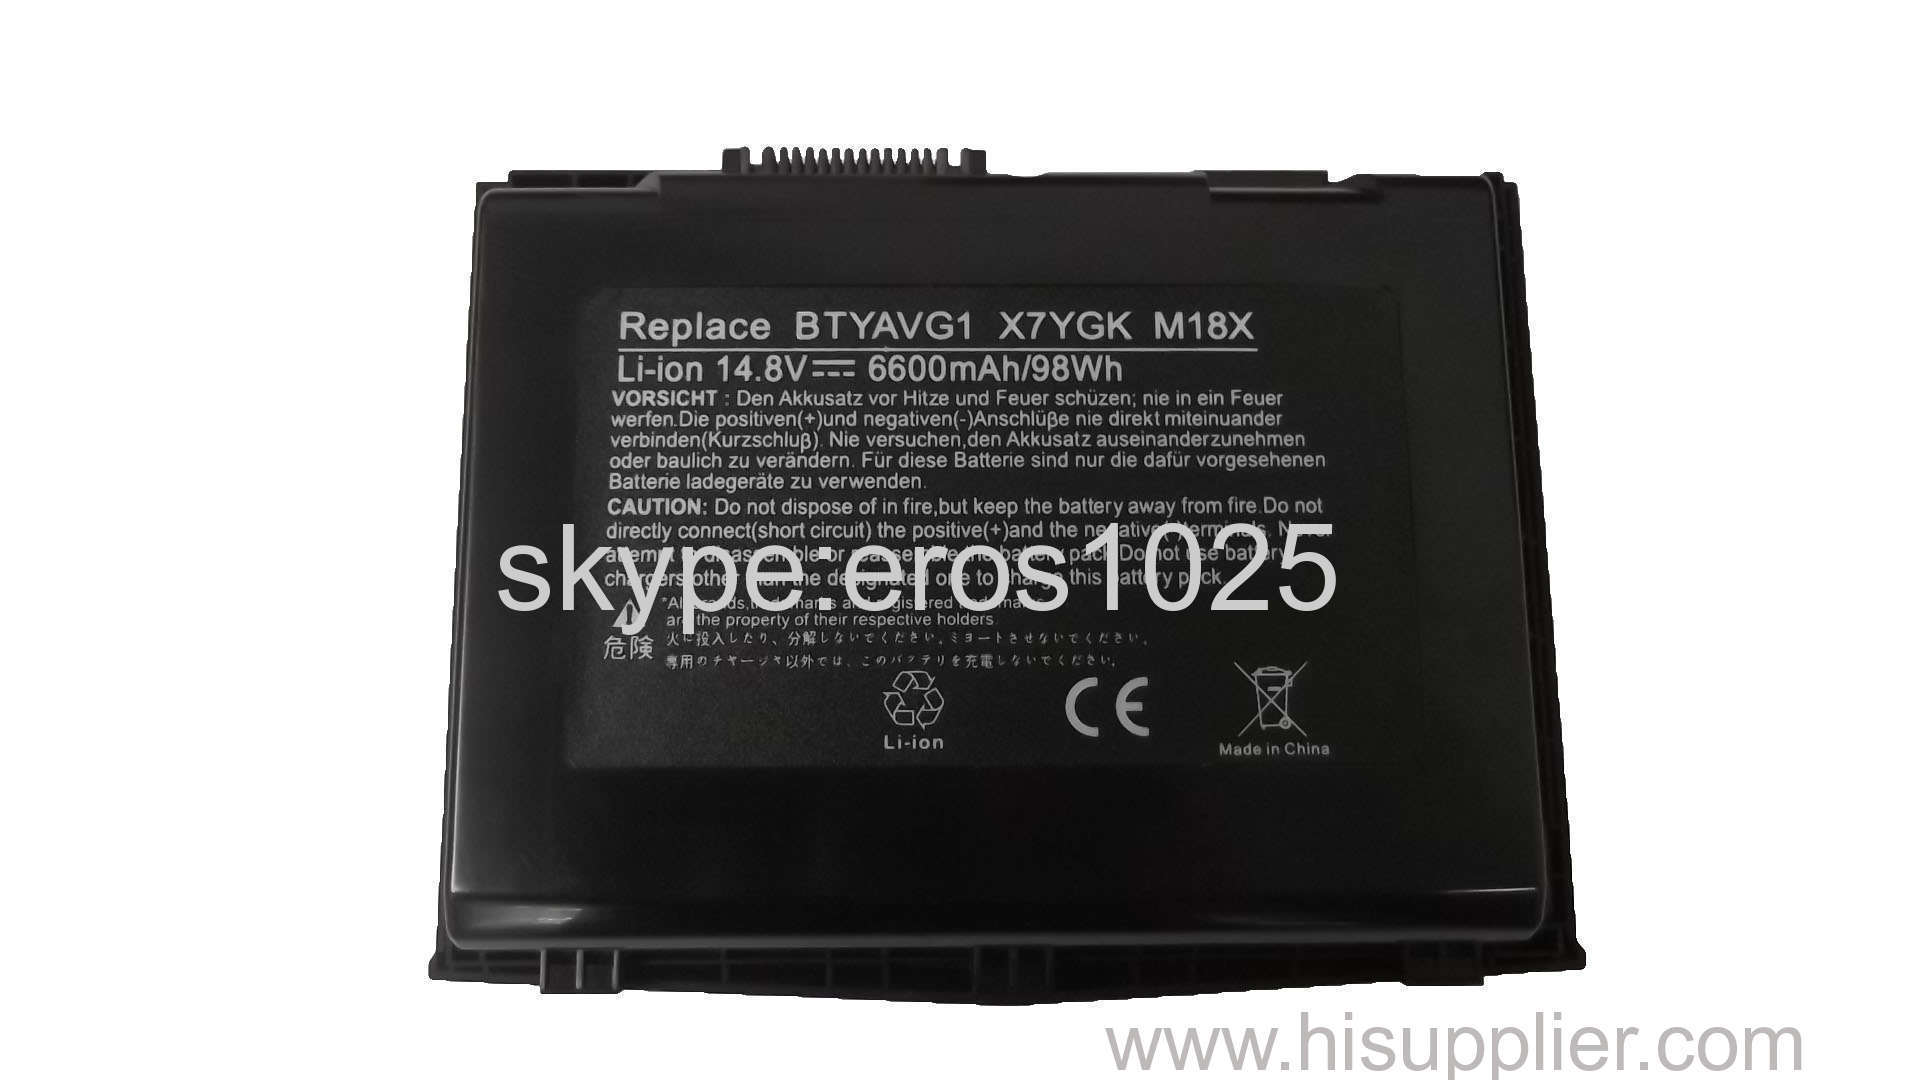 New Arrive 96Wh 12 Cells Genuine Notebook/Laptop Battery for Dell Alienware M18X R1 R2, BTYAVG